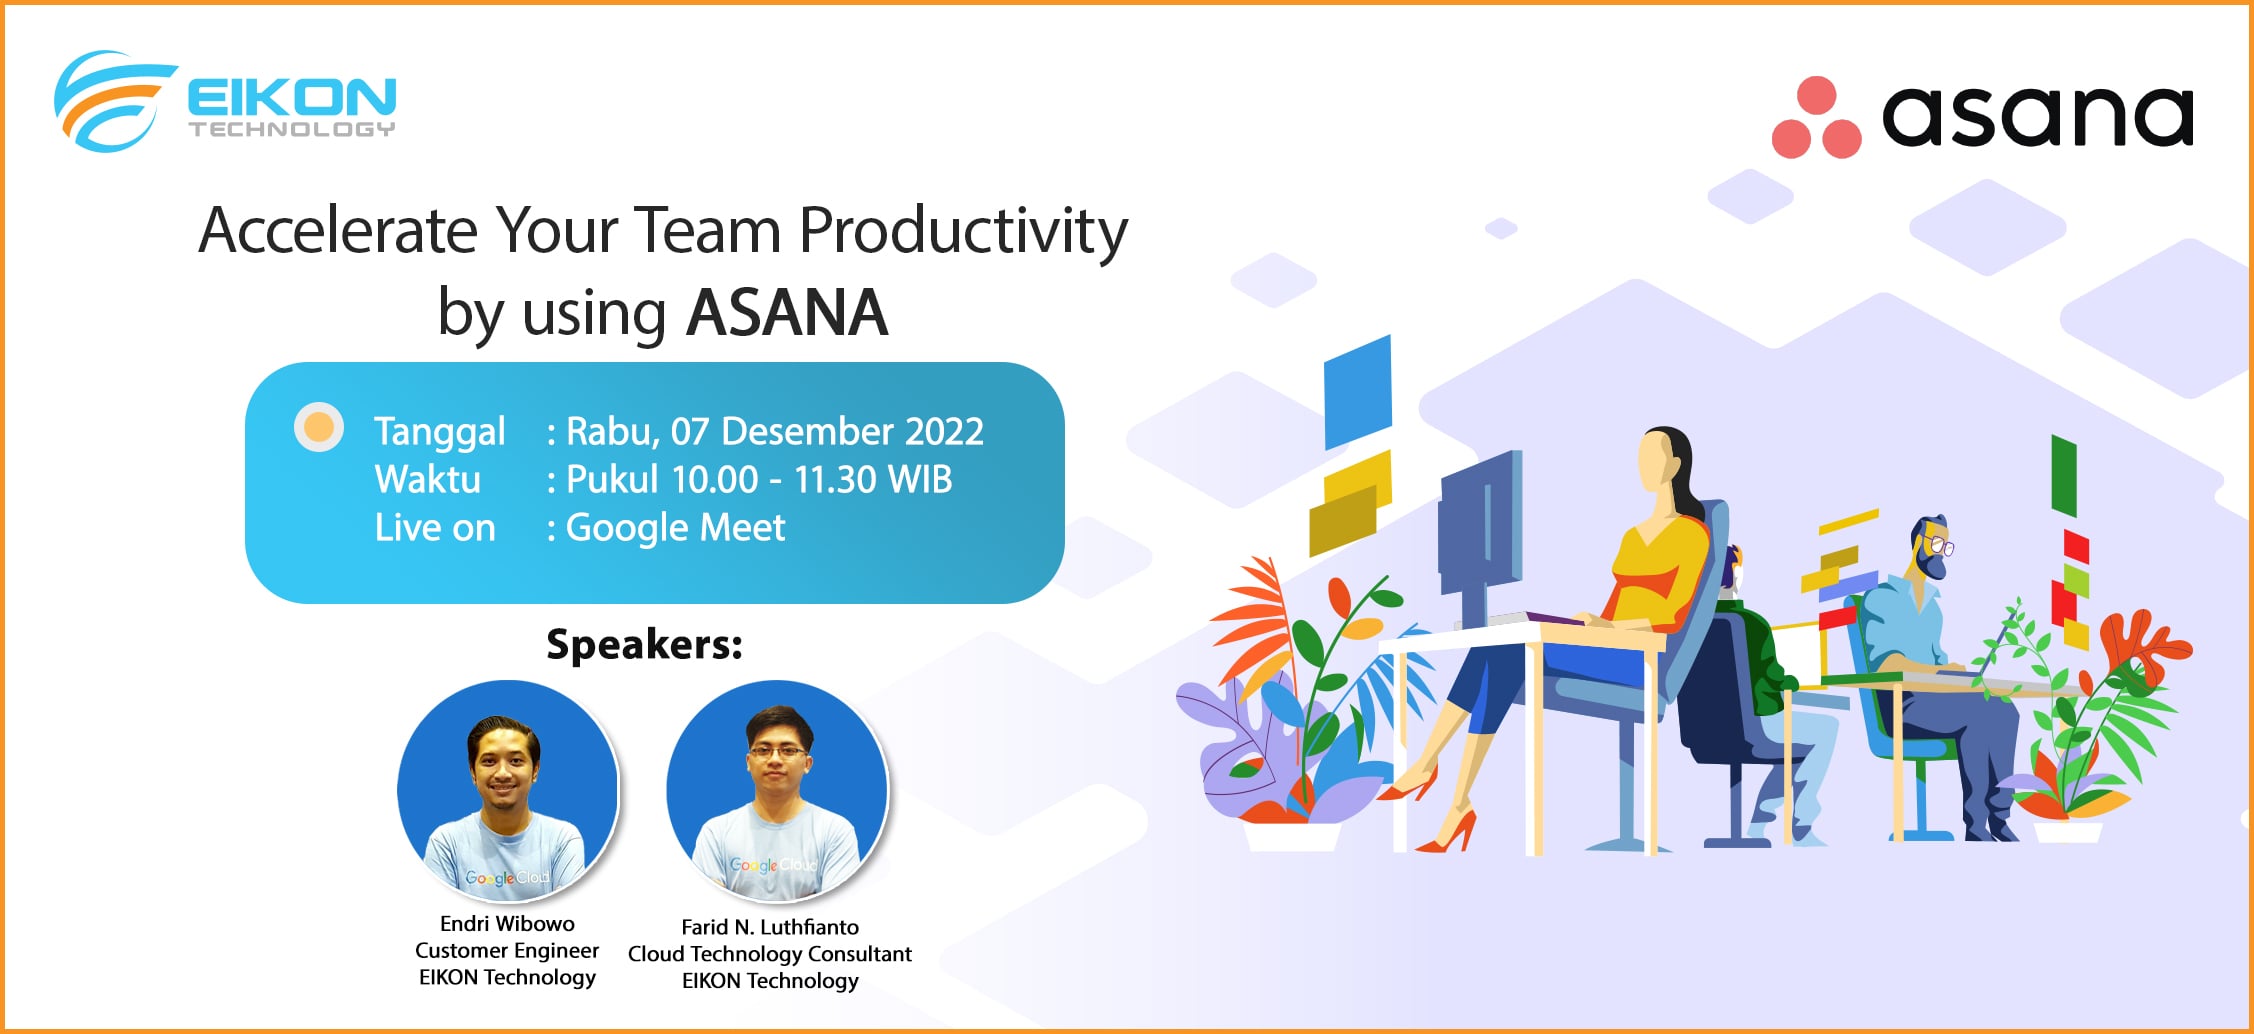 Accelerate Your Team Productivity by using ASANA